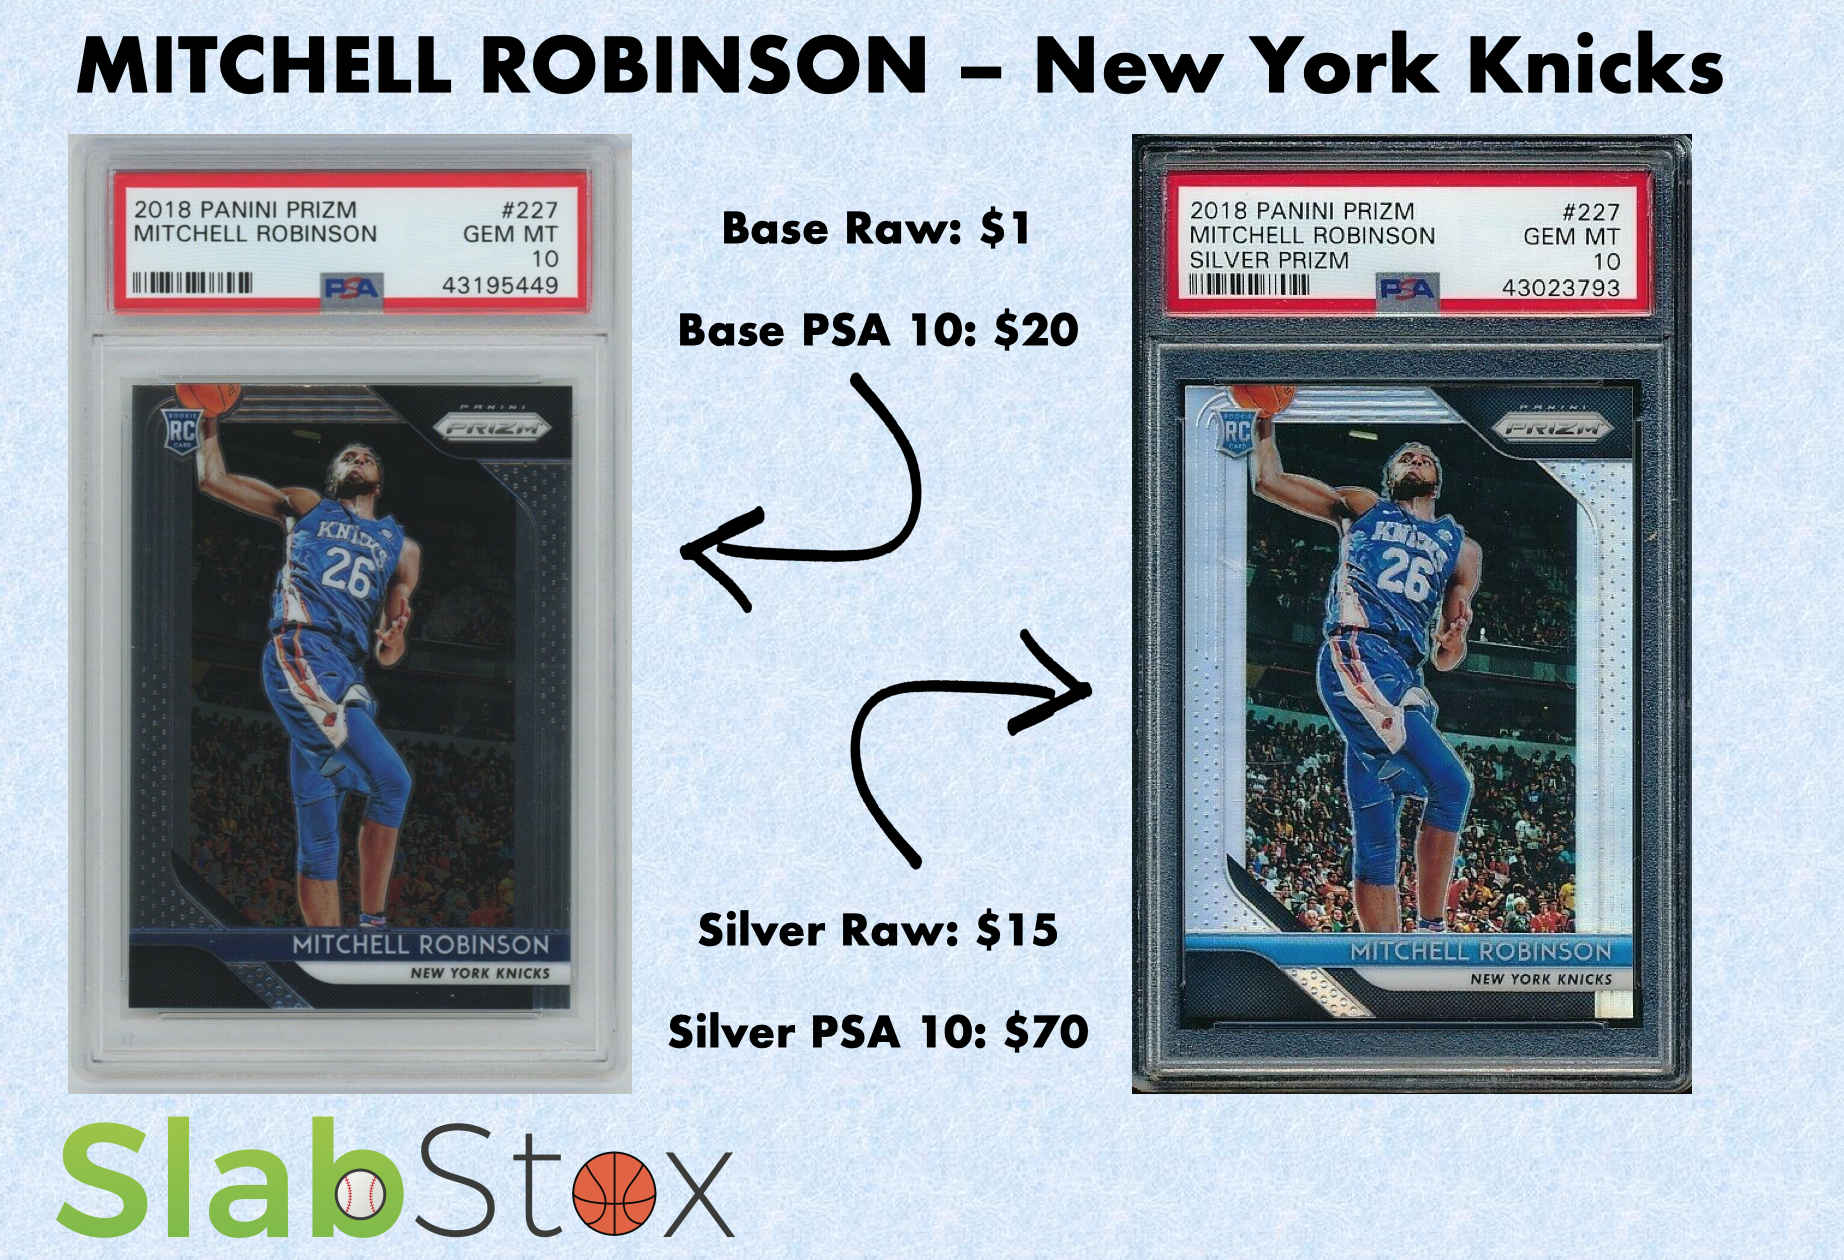 Graphic of sports cards of Mitchell Robinson of the New York Knicks with the SlabStox logo underneath